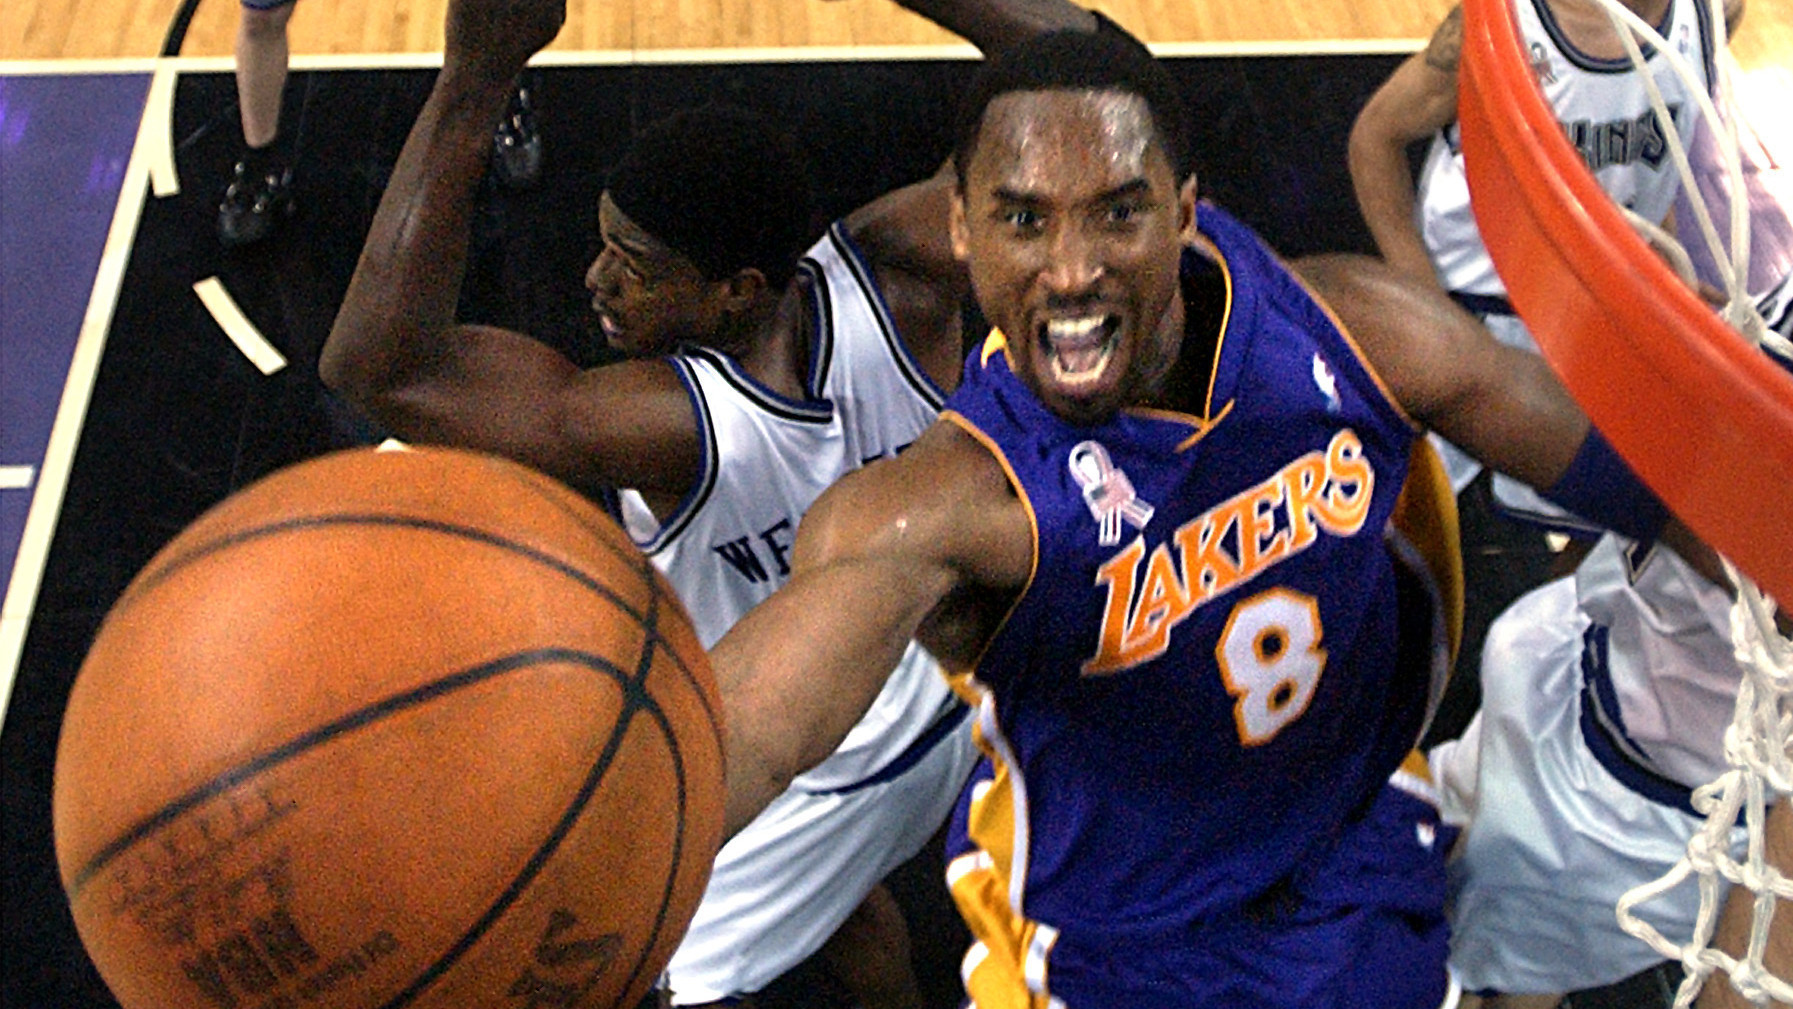 Remembering Kobe Bryant's 20-year career with the Lakers - LA Times